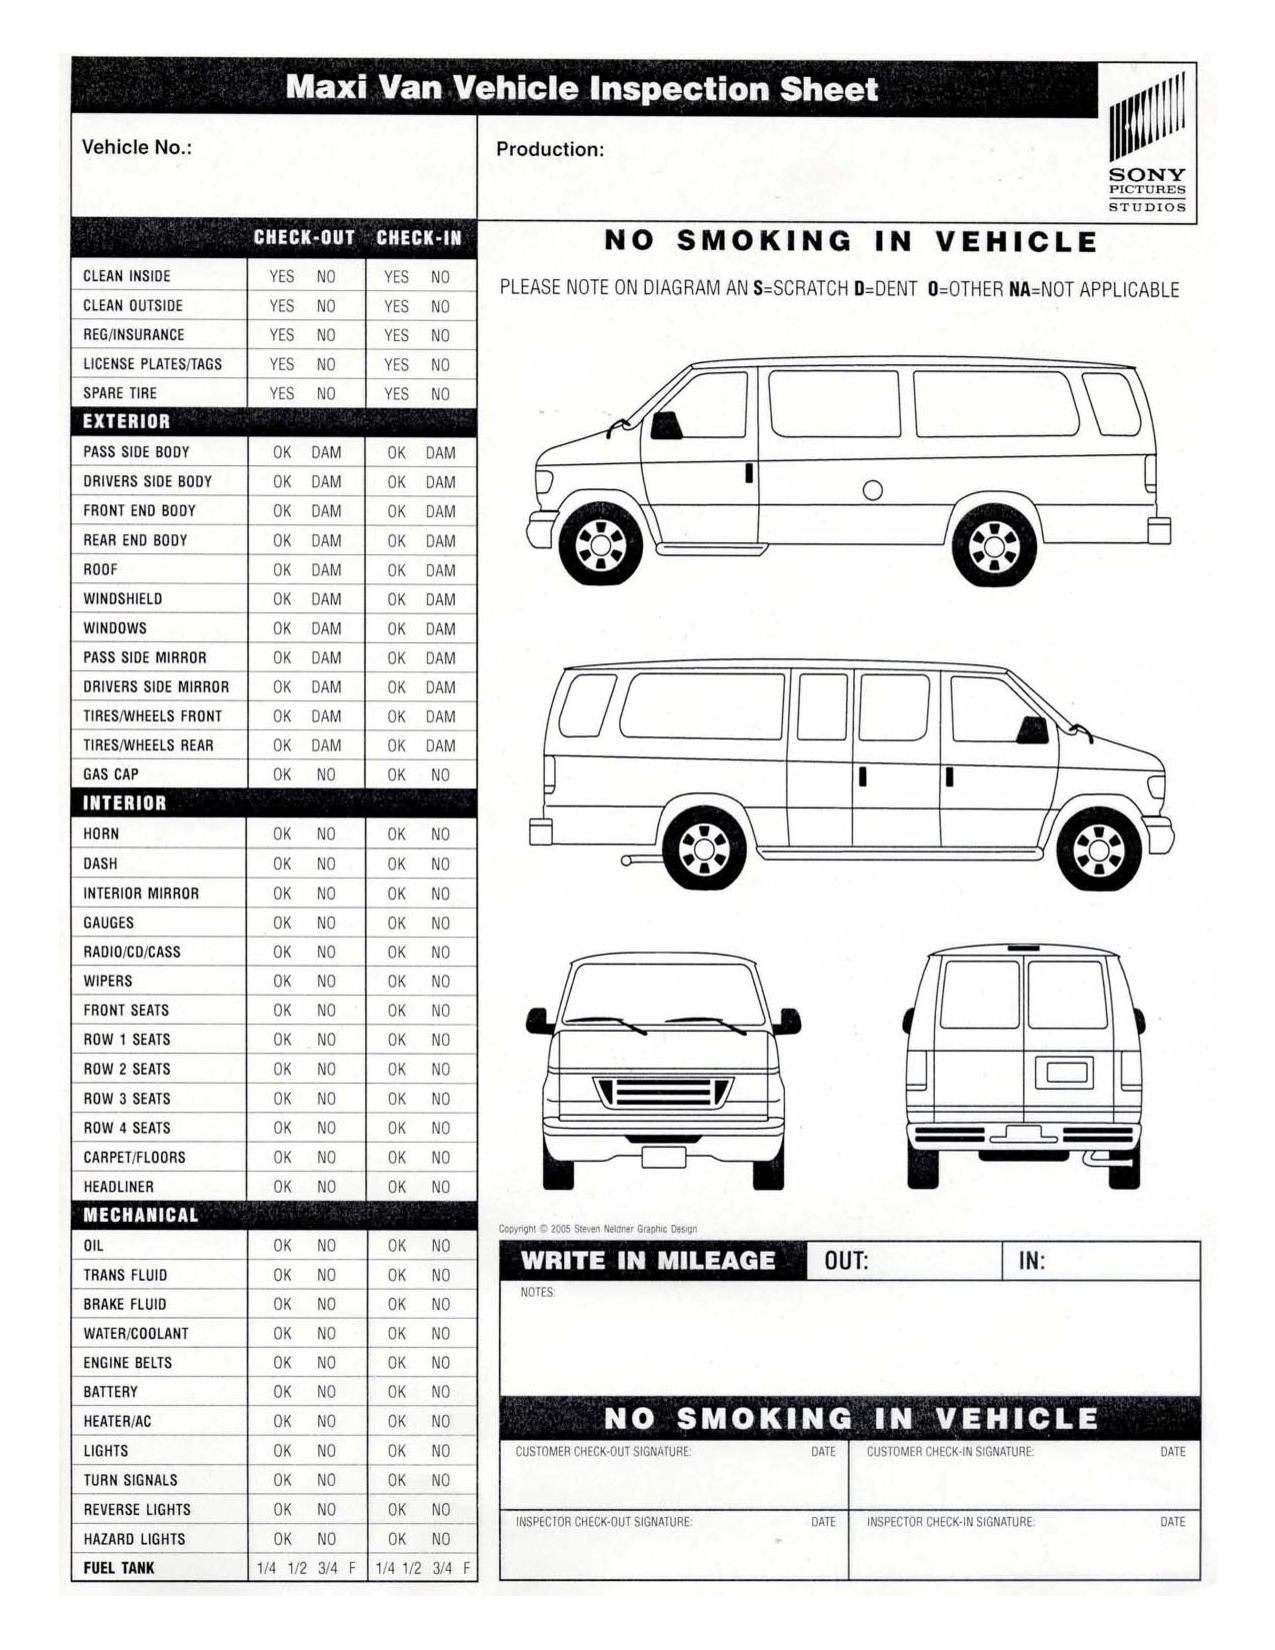 Annual Vehicle Inspection Form Free Universal Network